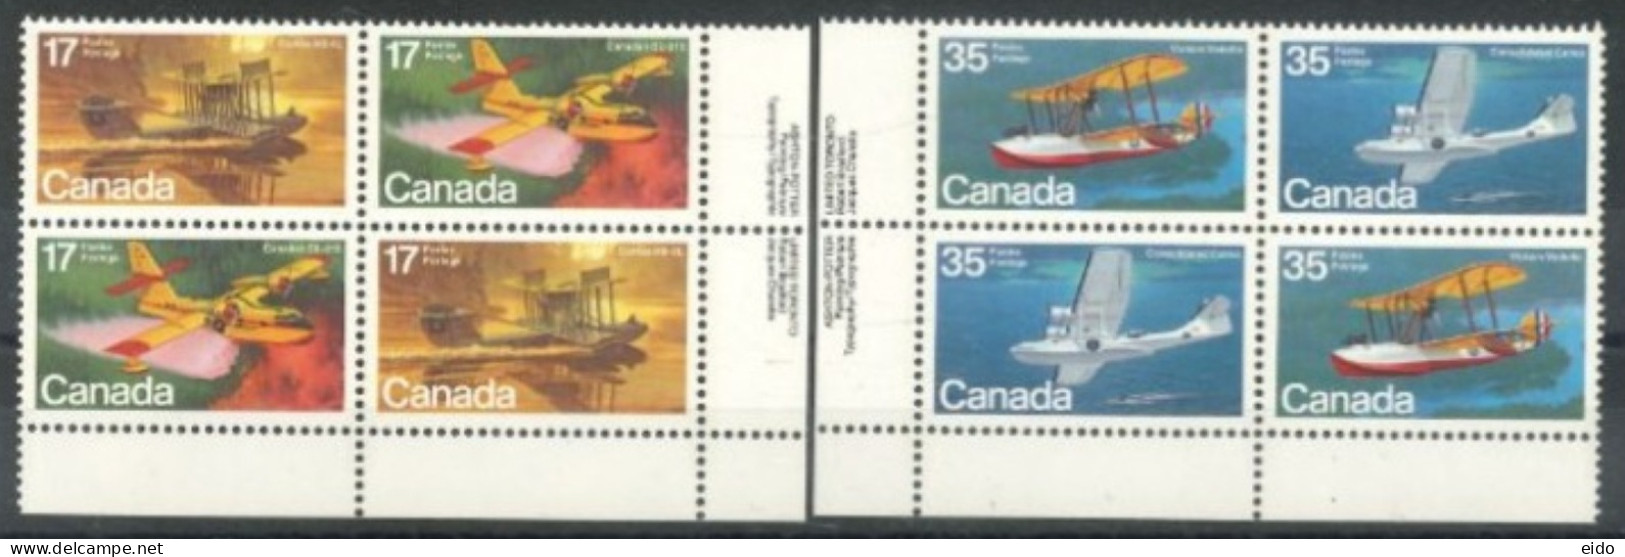 CANADA - 1979, CANADIAN AIRCRAFT (FIRST SERIES), FLYING BOATS STAMPS COMPLETE SET OF 4, 2 OF EACH, UMM (**). - Nuevos